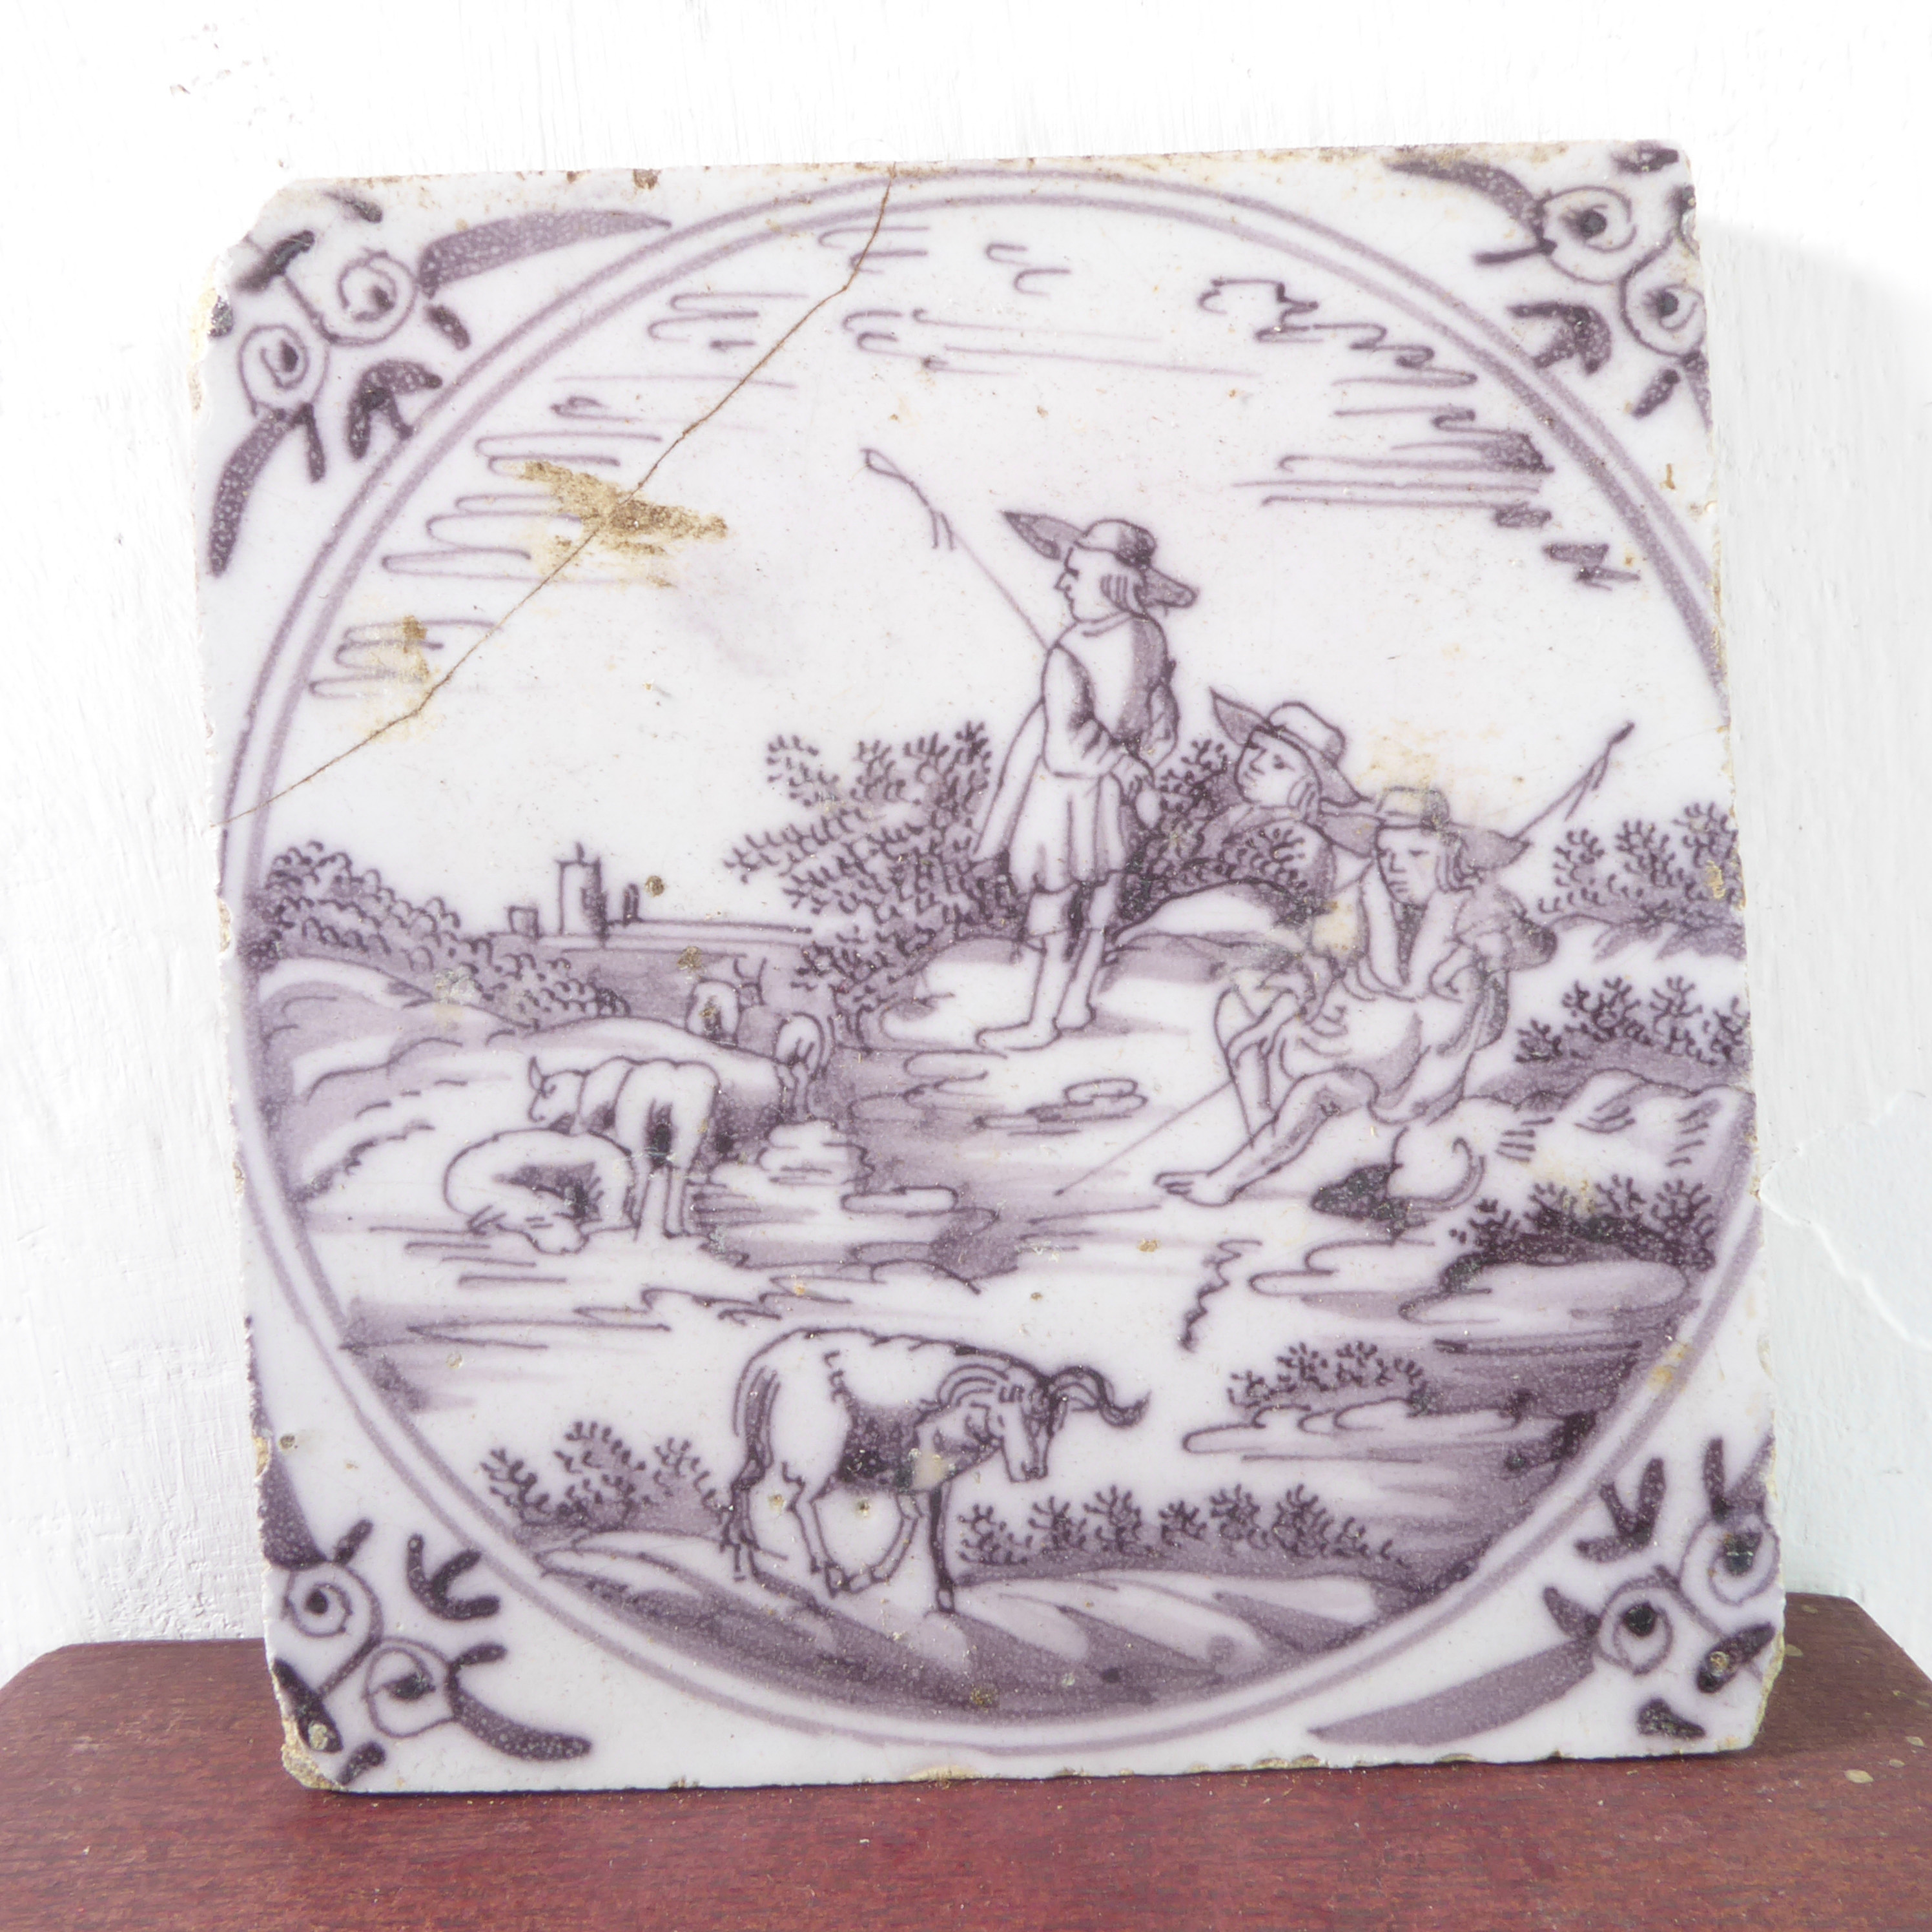 Thirteen early puce-coloured Delftware tiles (probably 18th century) with unusual depictions to - Image 14 of 15